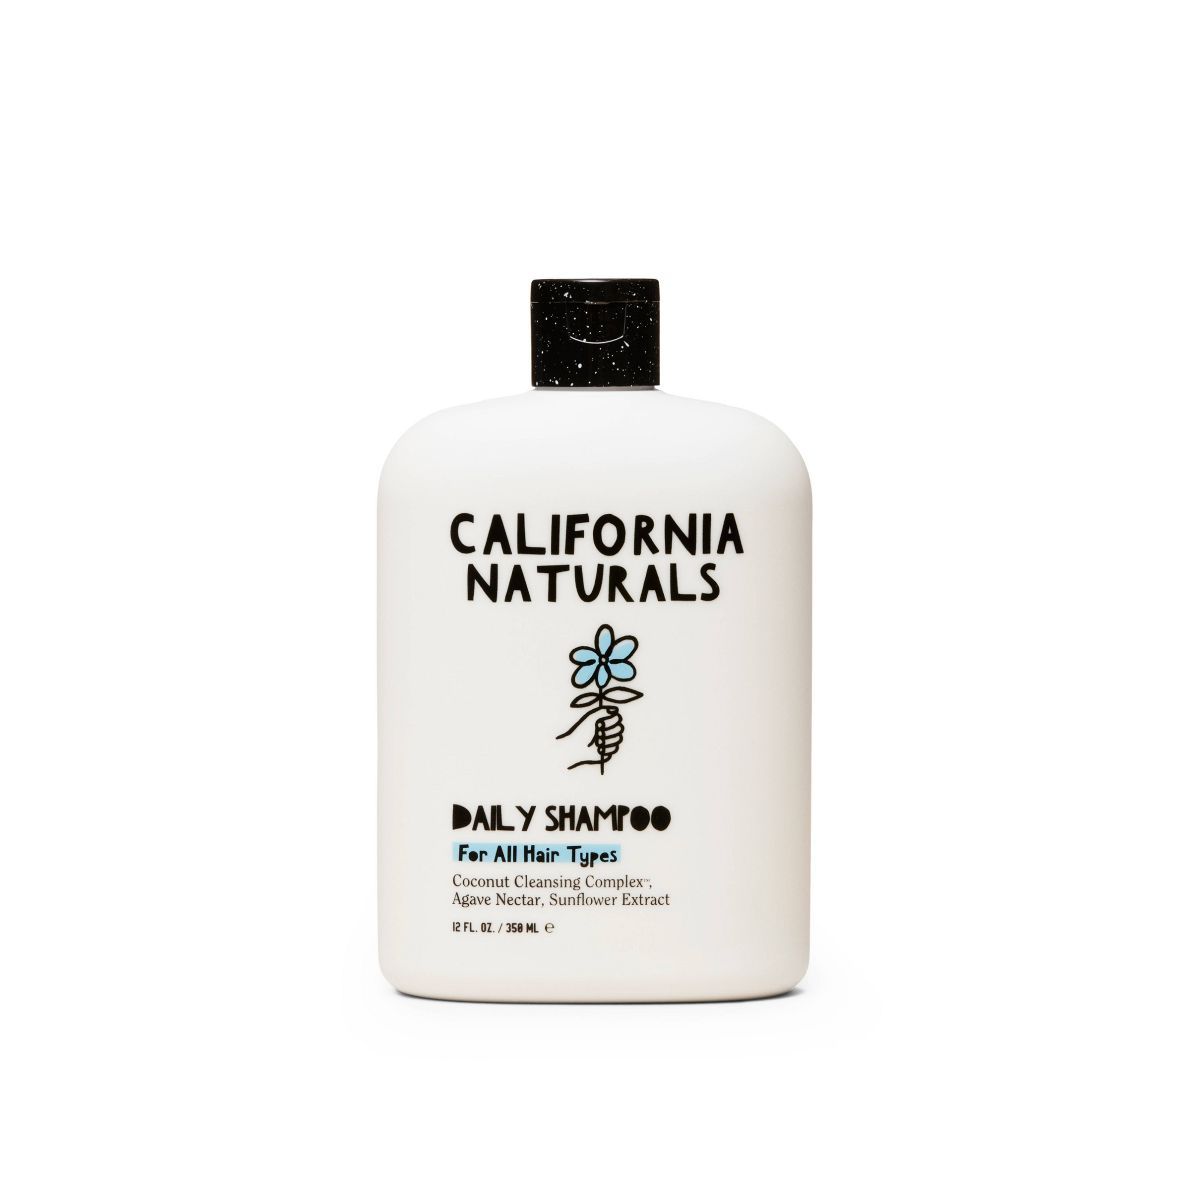 California Naturals Coconut Cleansing Vegan, Sulfate & Paraben-Free Daily Shampoo - 12 fl oz | Target